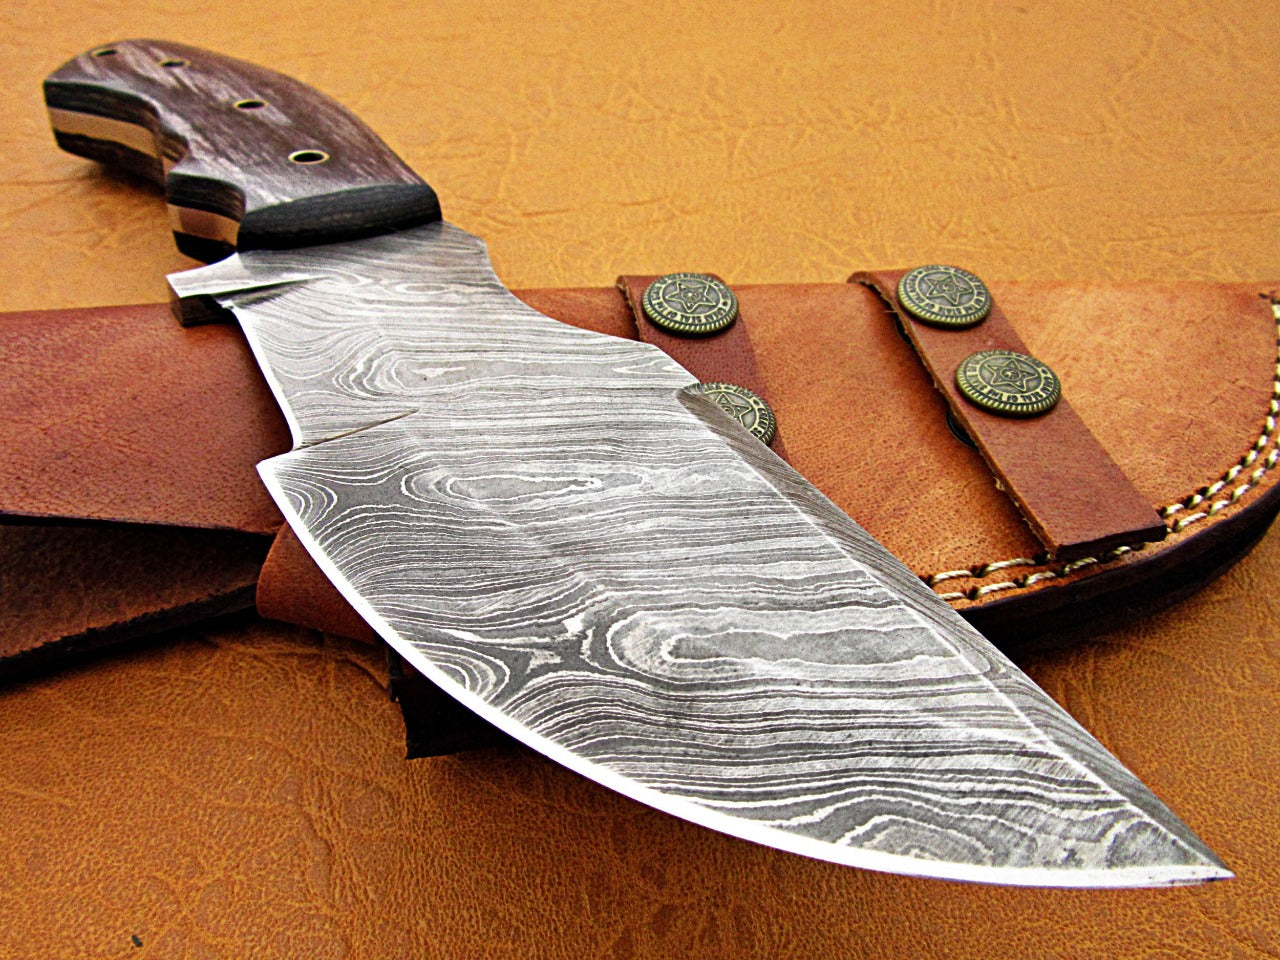 10" Long hand forged twist pattern full tang hand forged Damascus steel tracker knife, dollar wood with holes scale, Cow hide leather sheath